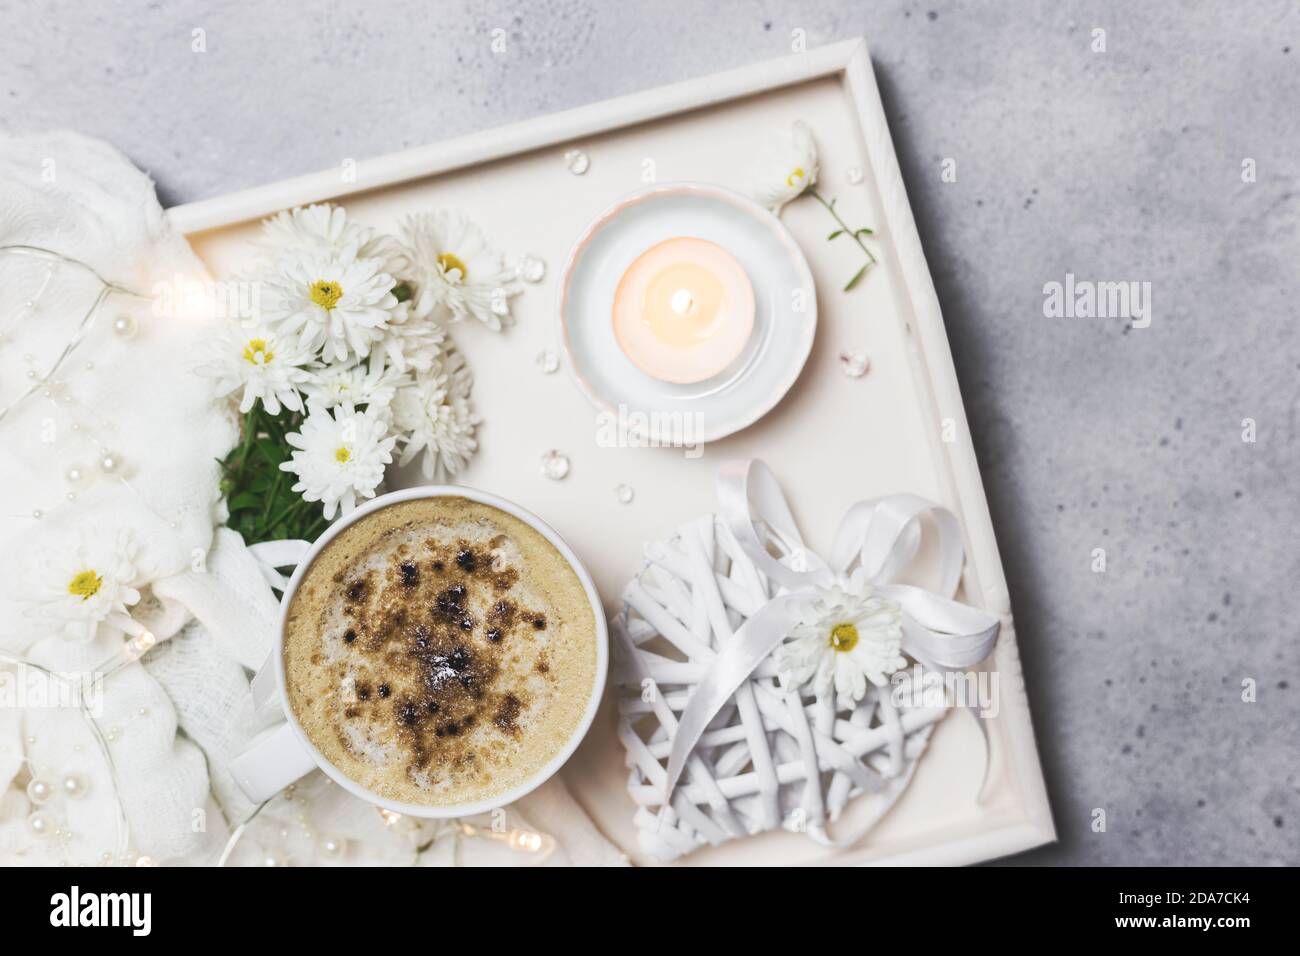 Cozy morning moments at home with cup of coffee, candles and flowers. on a wooden tray. Flat lay for bloggers. Stock Photo